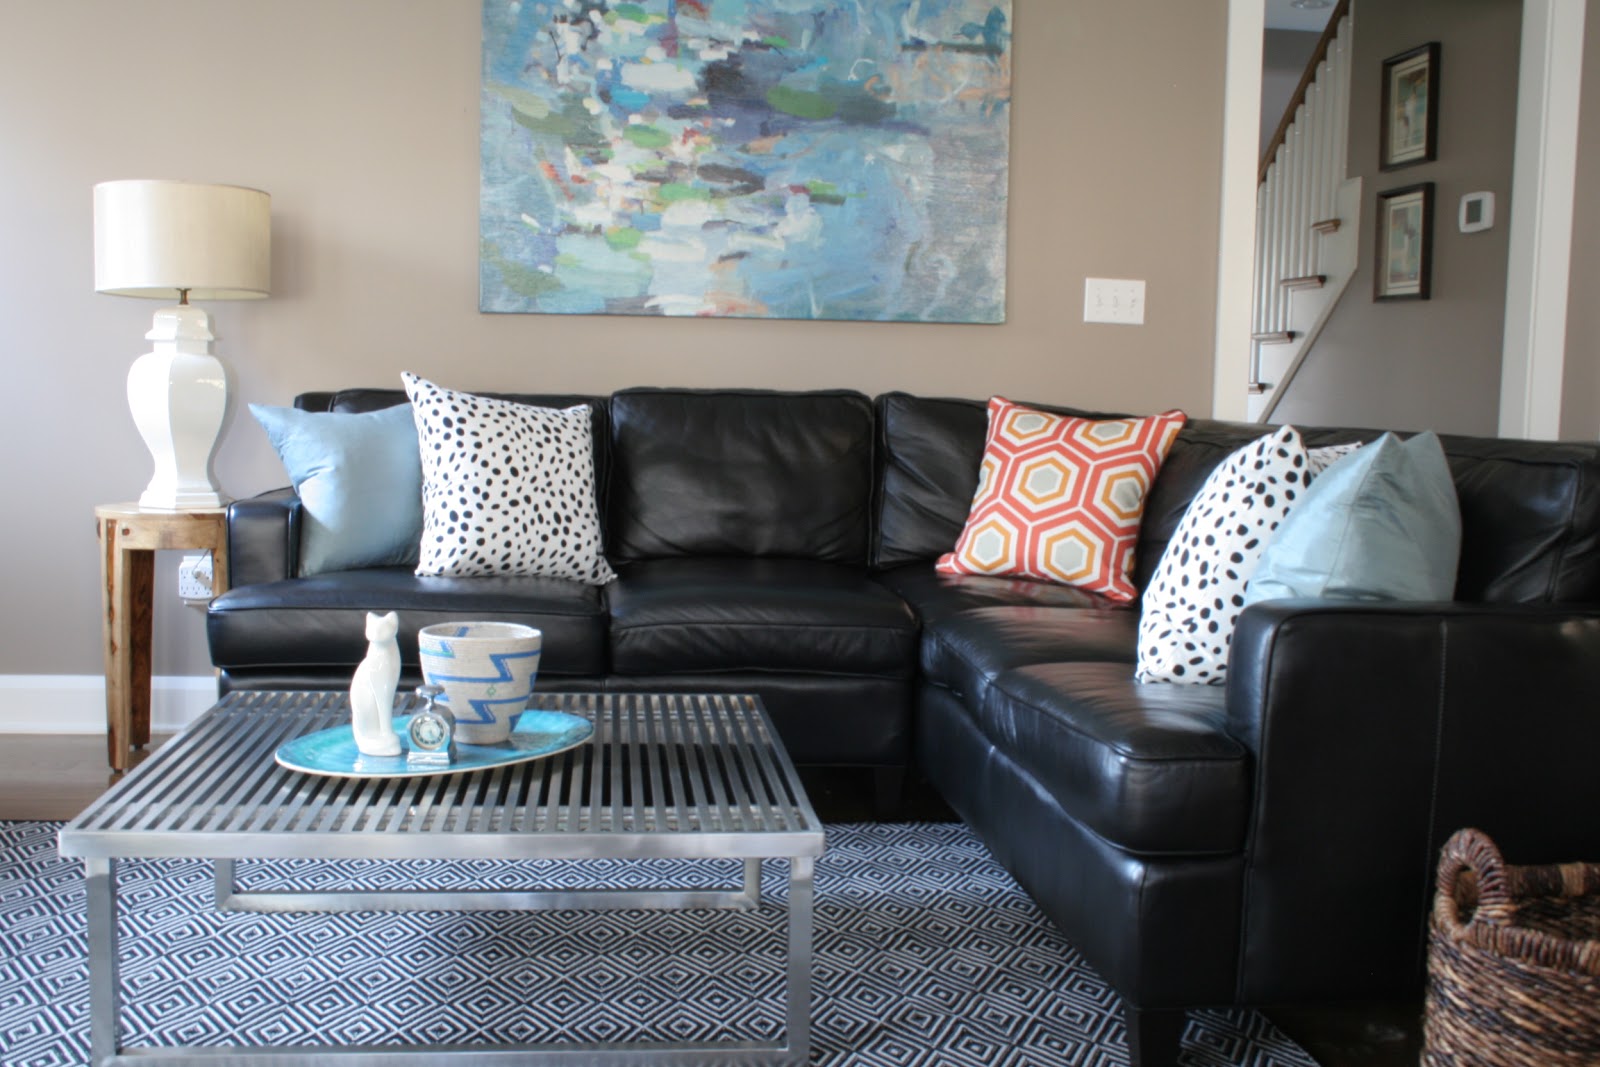 Bring An Old Leather Sofa Back To Life, Decorating With Black Leather Furniture